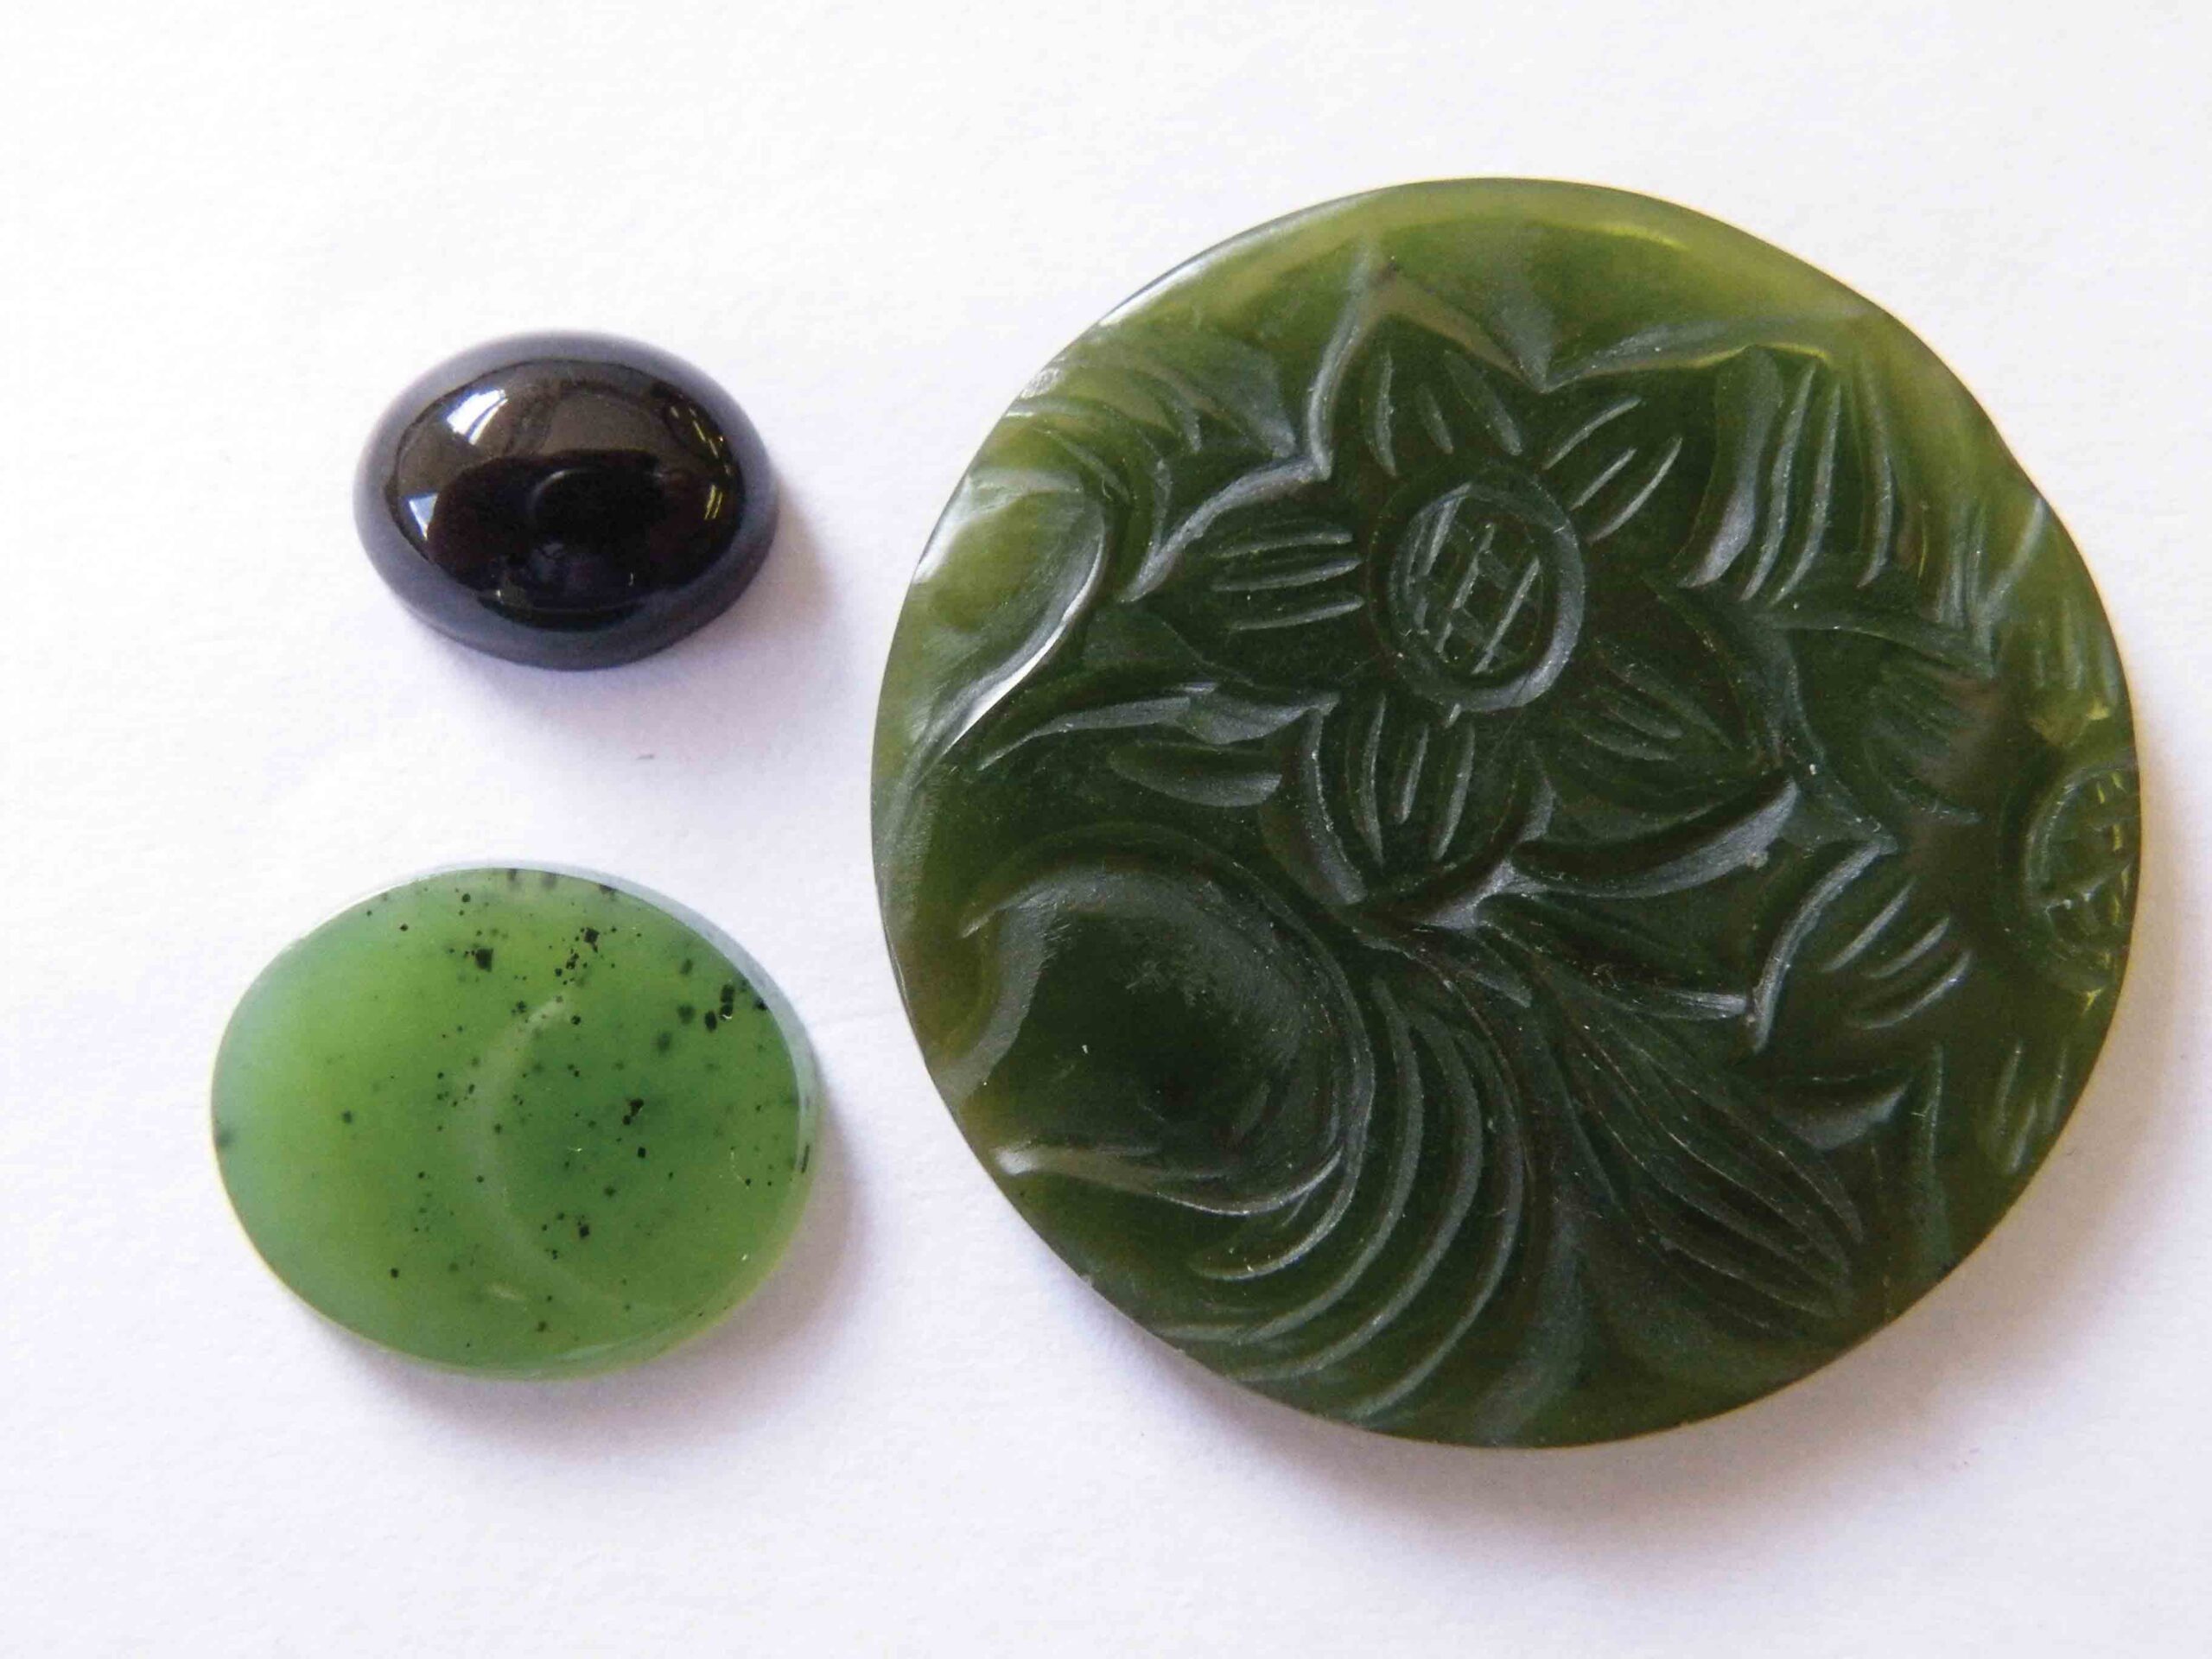 Gemstone Discoveries: What Is the Likeliness of Finding a ‘New’ Gemstone? - - Nephrite jade photographed scaled